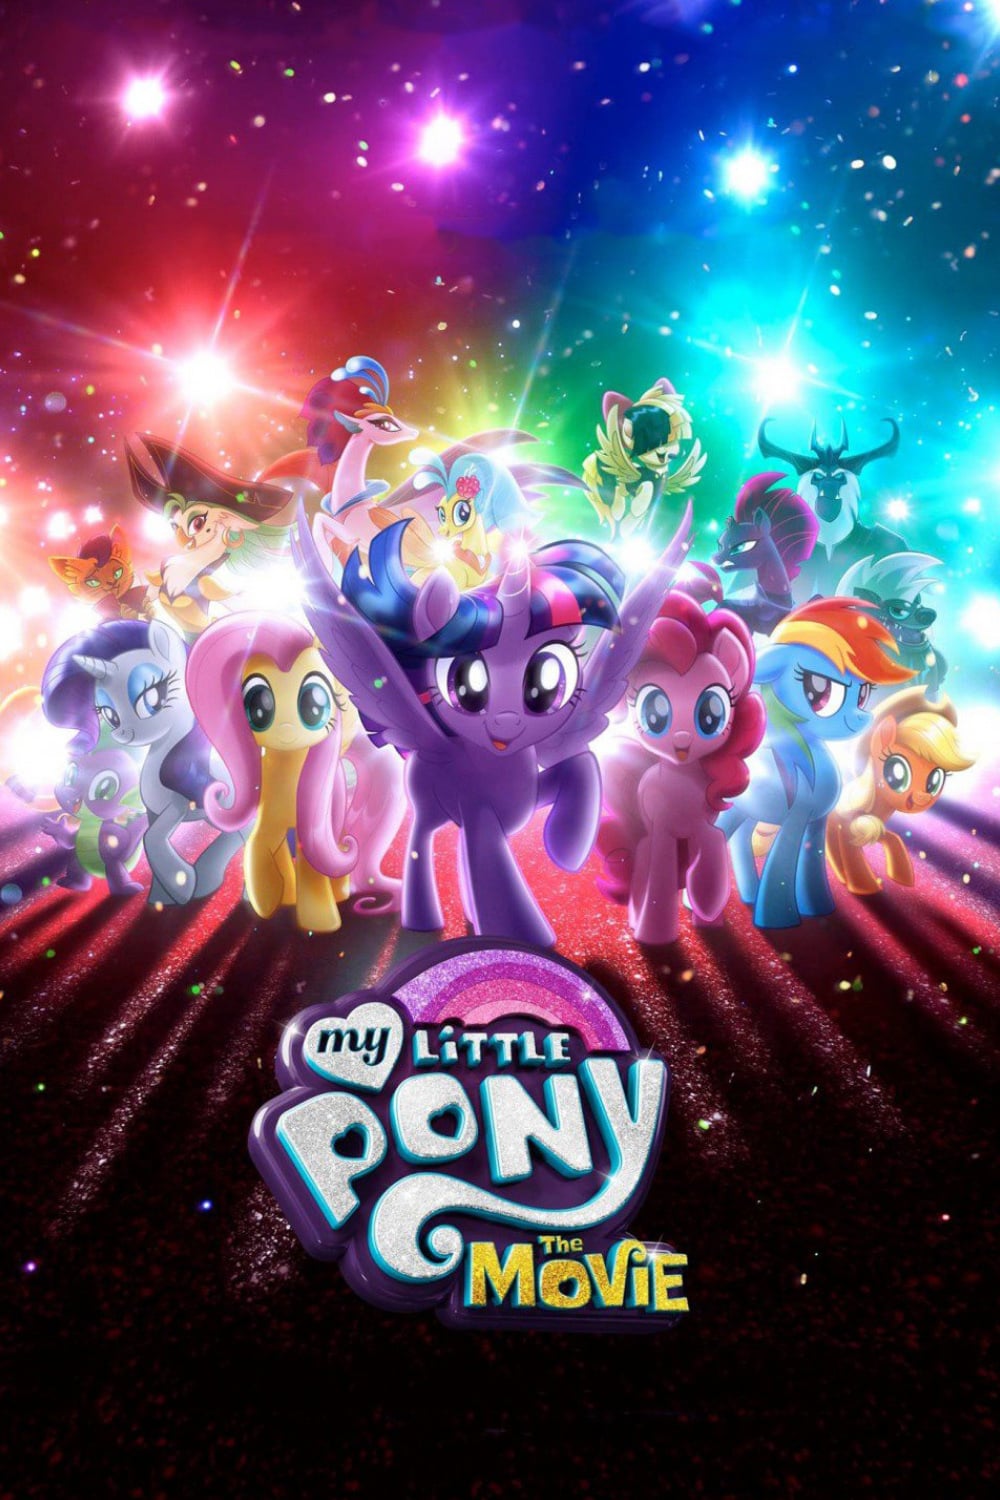 Poster for the movie "My Little Pony: The Movie"